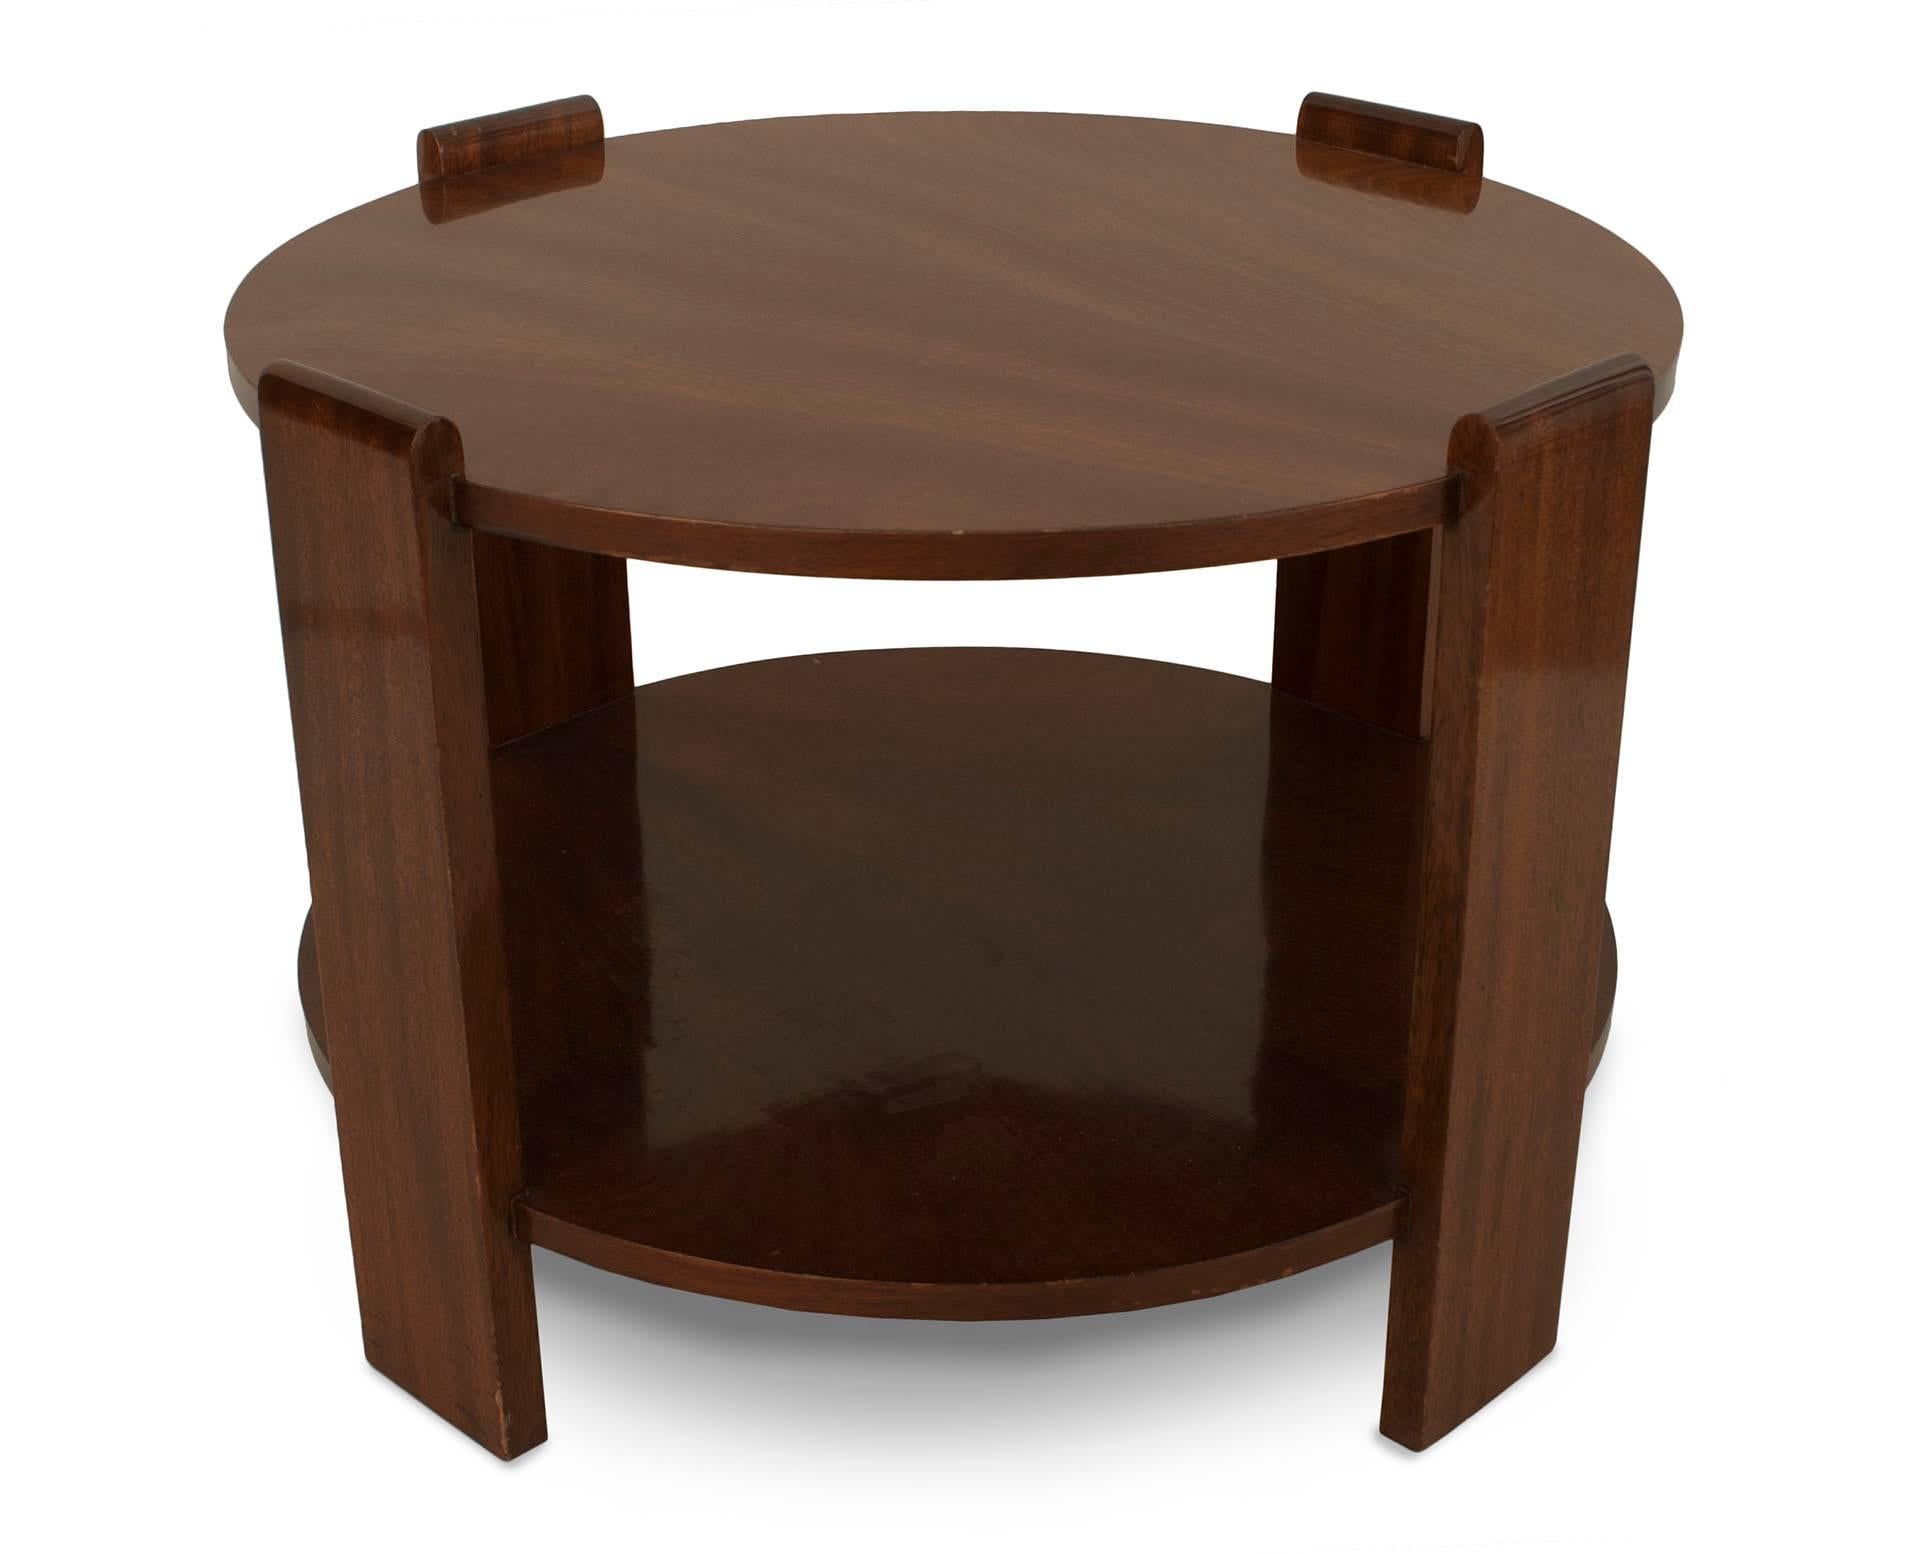 French Art Deco round mahogany coffee table with a lower shelf supported by four side supports with rounded tops.
